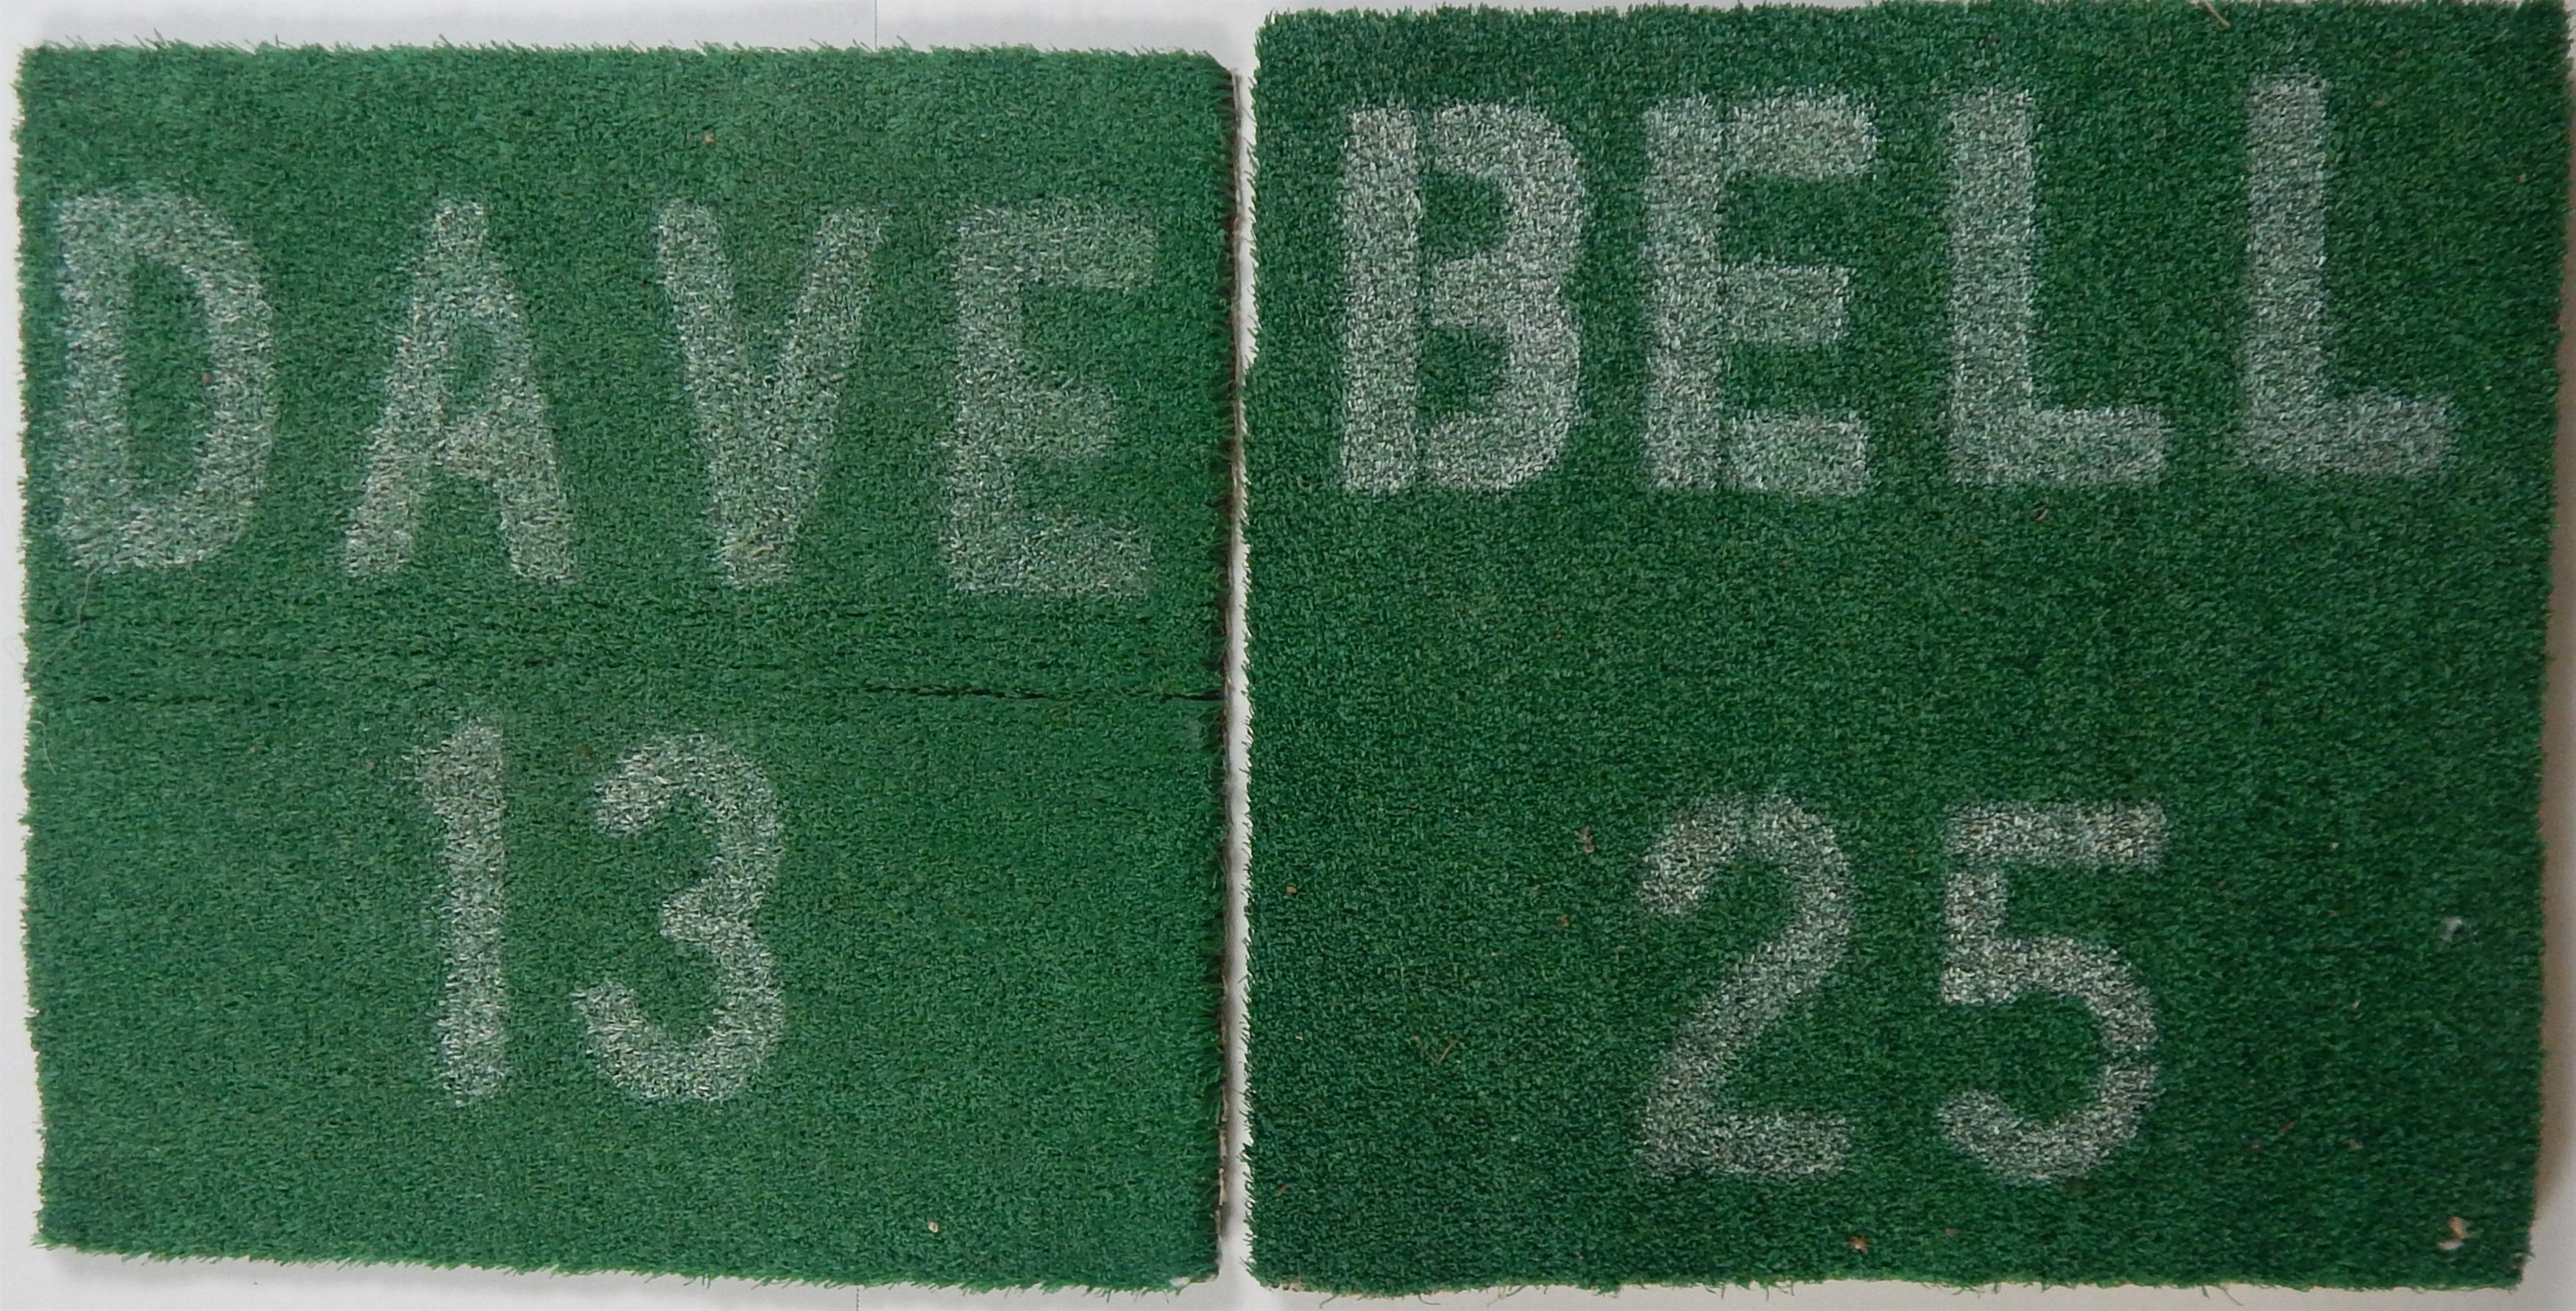 Riverfront Stadium Turf Used in Reds Locker Room From the Bernie Stowe Collection